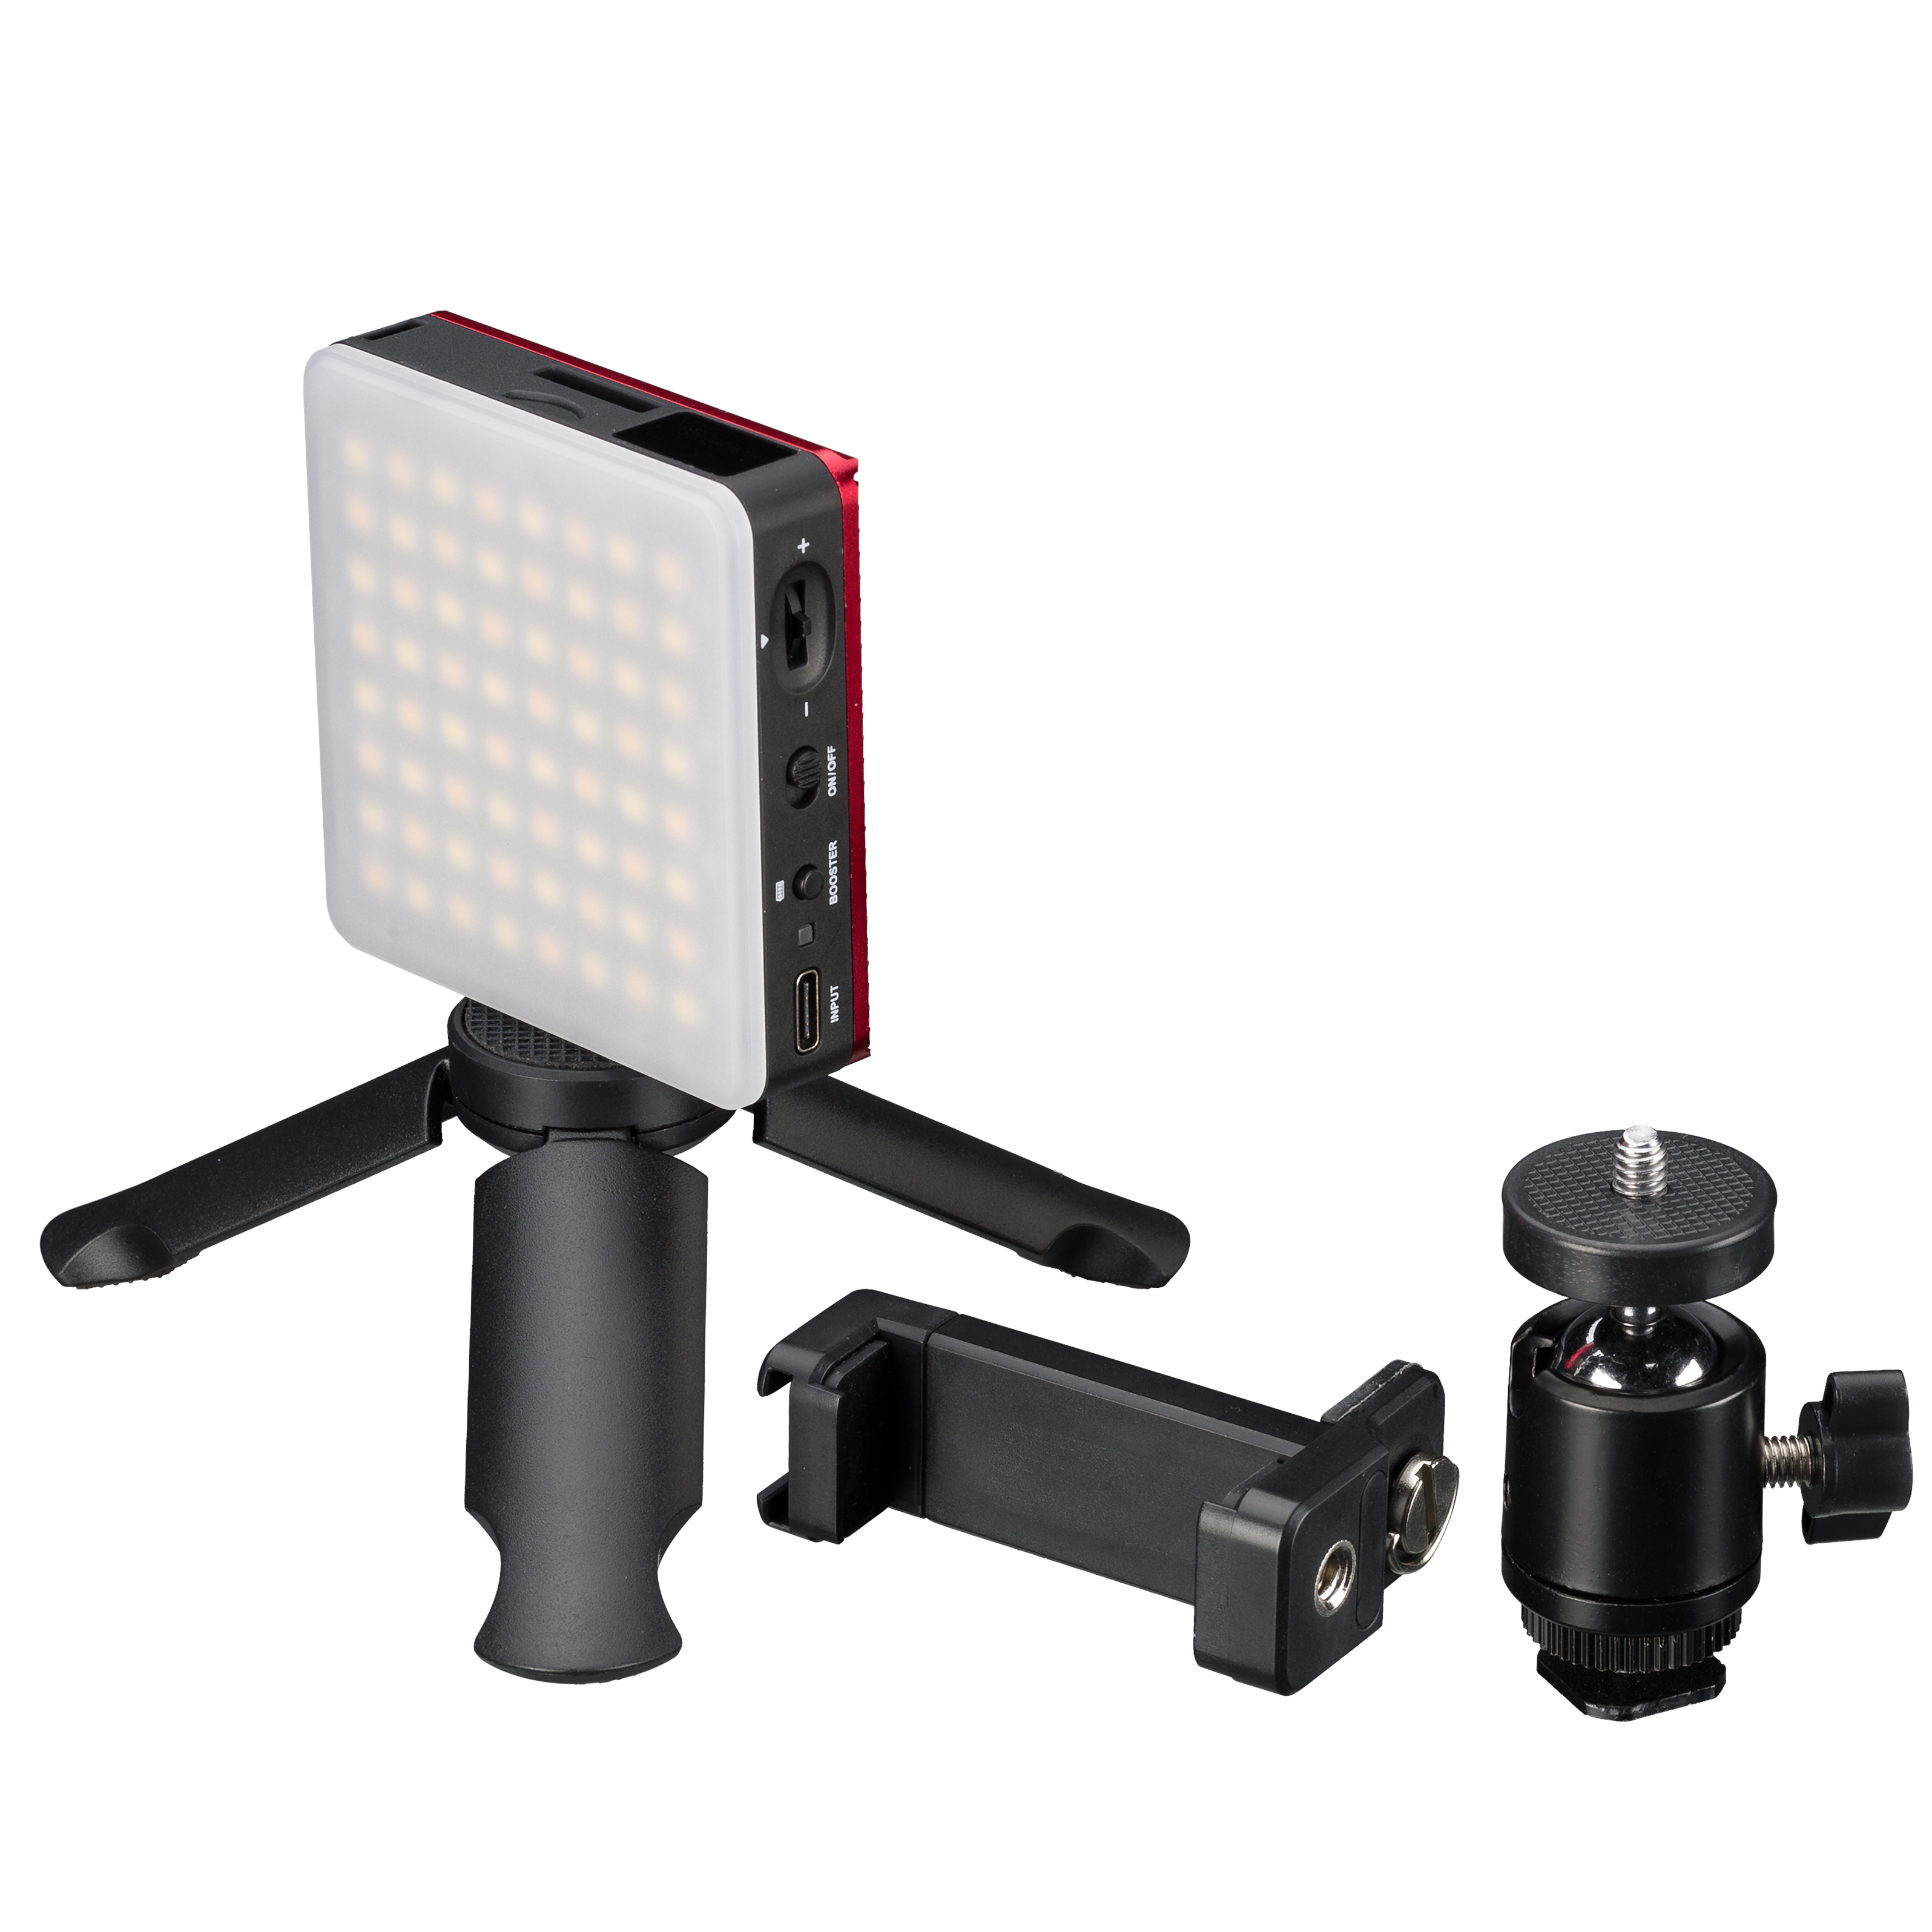 BRESSER Pocket LED 5 W Bi-Colour continuous Panel Light for on-the-go Use and Smartphone Photography